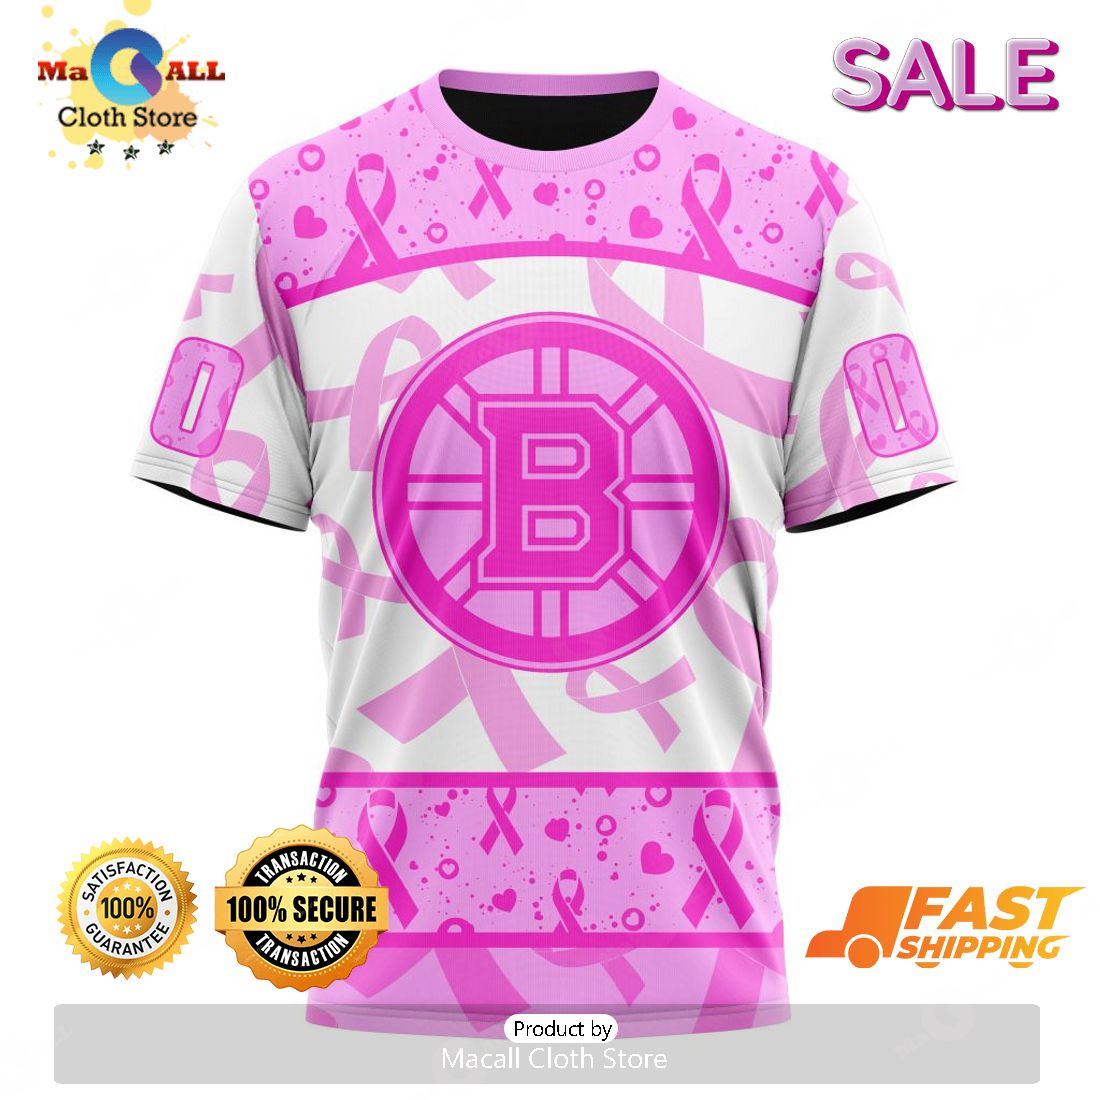 NHL Boston Bruins Personalized Special Design I Pink I Can In October We  Wear Pink Breast Cancer Hoodie T Shirt - Growkoc